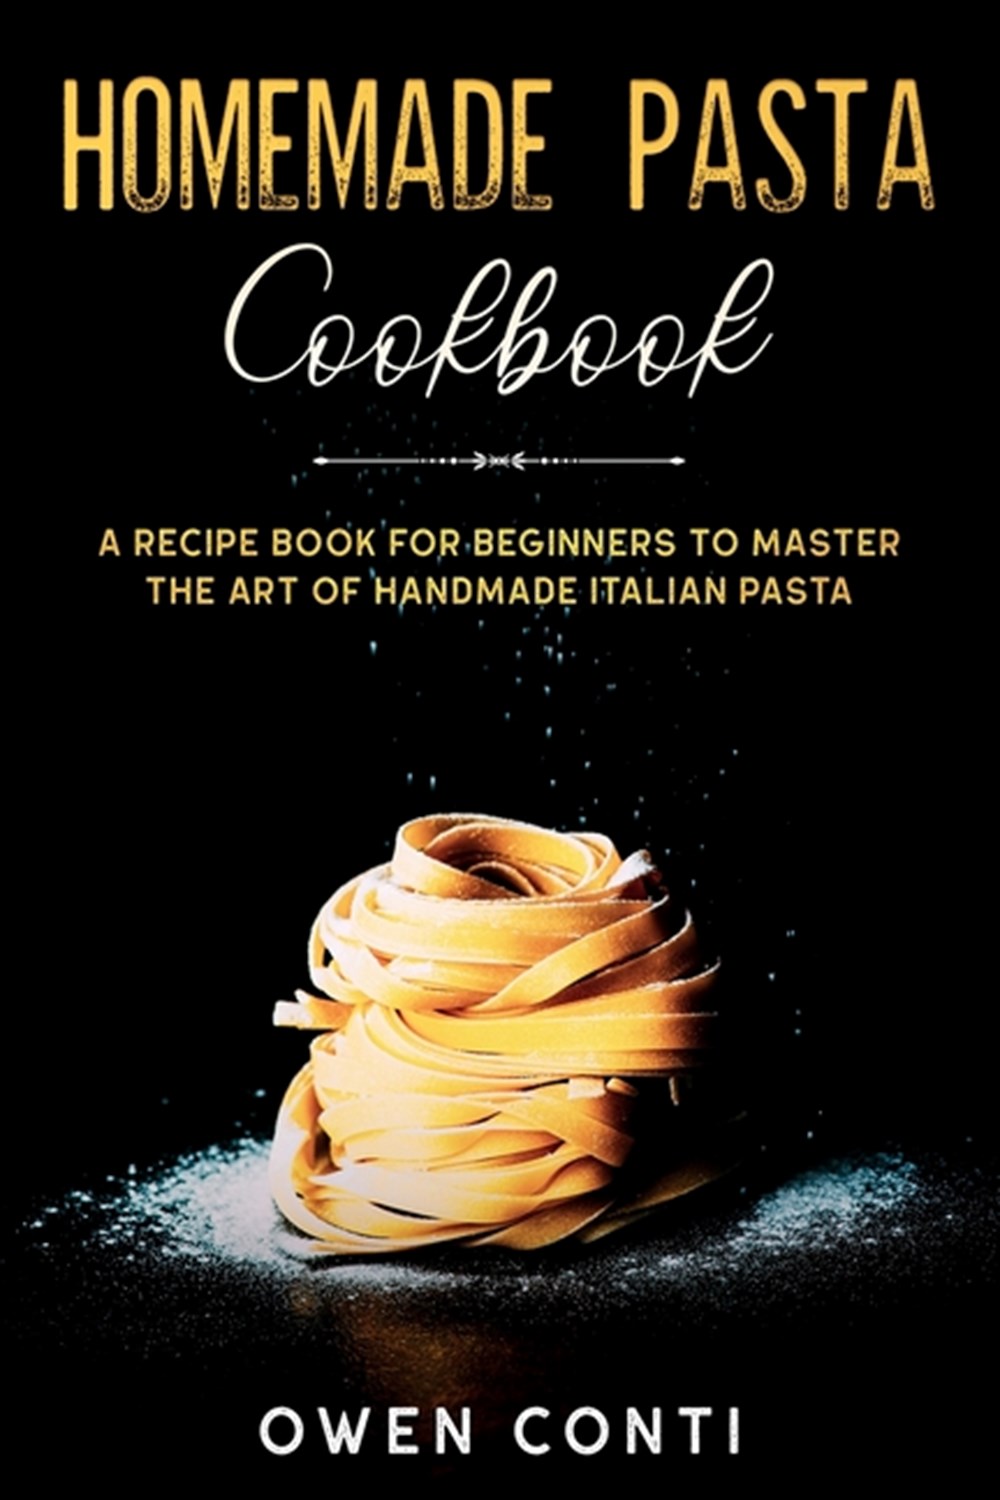 buy-homemade-pasta-cookbook-a-recipe-book-for-beginners-to-master-the